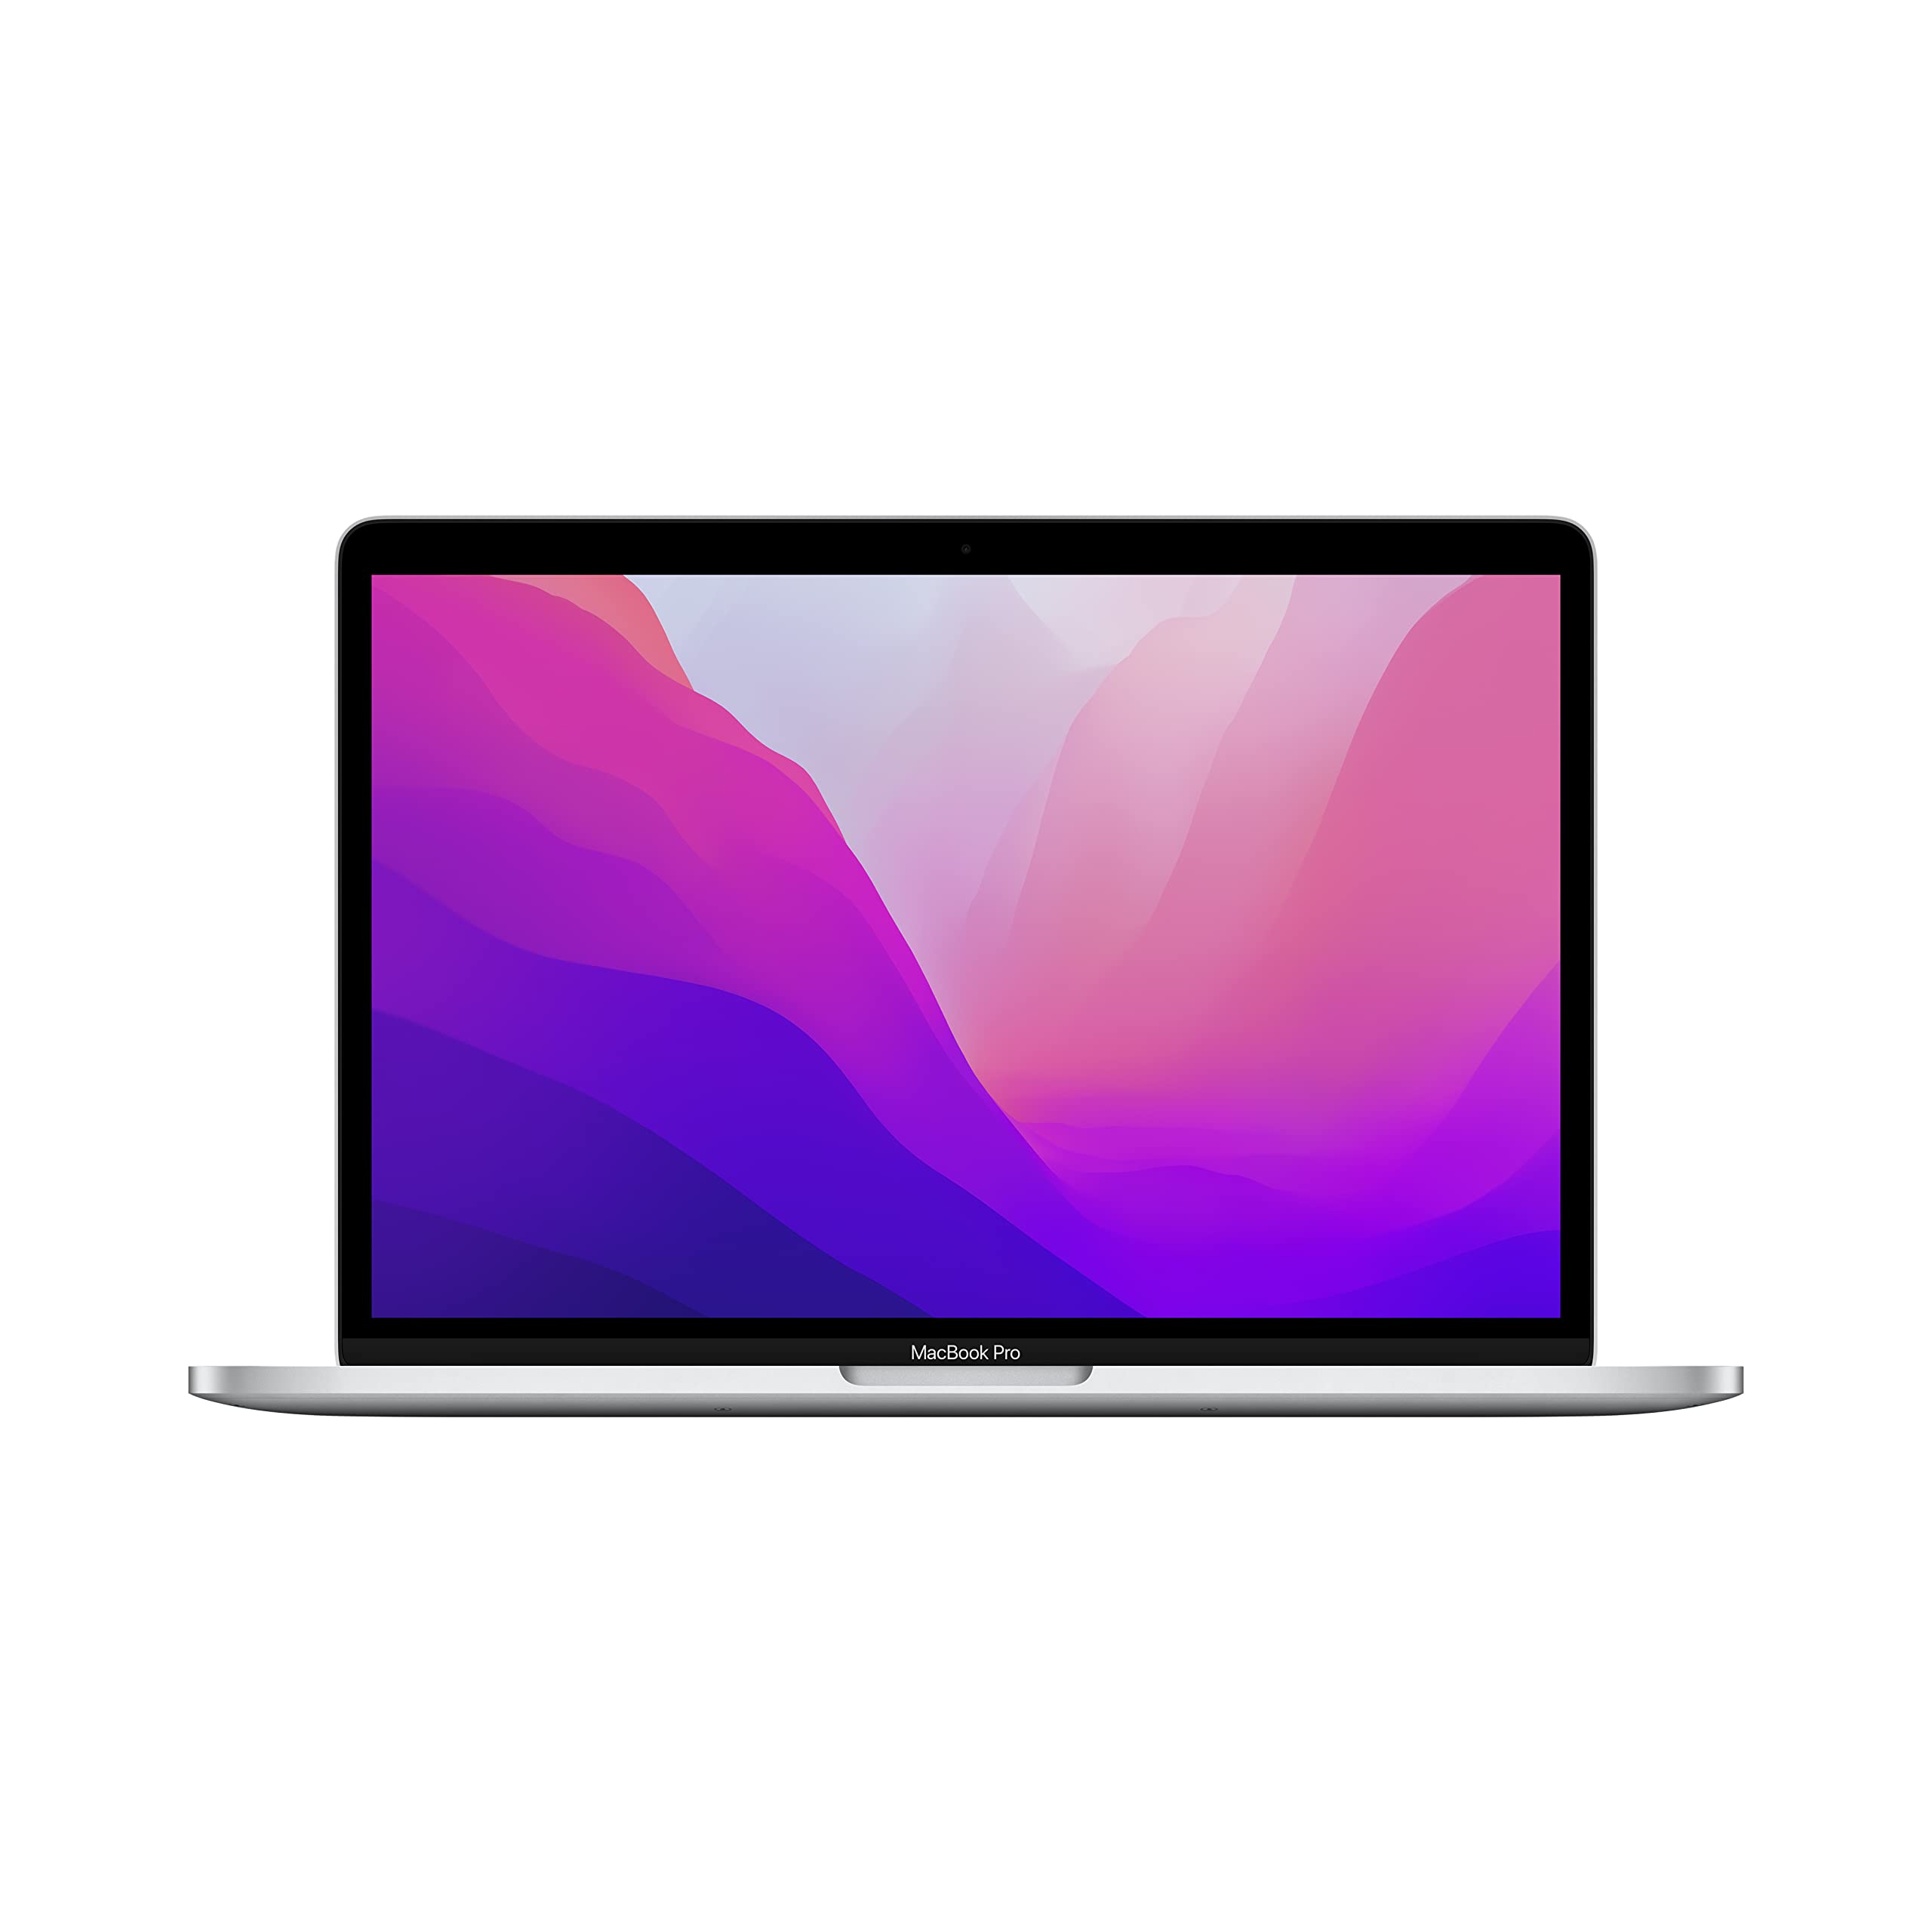 Apple 2022 MacBook Pro Laptop with M2 chip: 13-inch Retina Display, 8GB RAM, 256GB ​​​​​​​SSD ​​​​​​​Storage, Touch Bar, Backlit Keyboard, FaceTime HD Camera.  Silver $1099.99